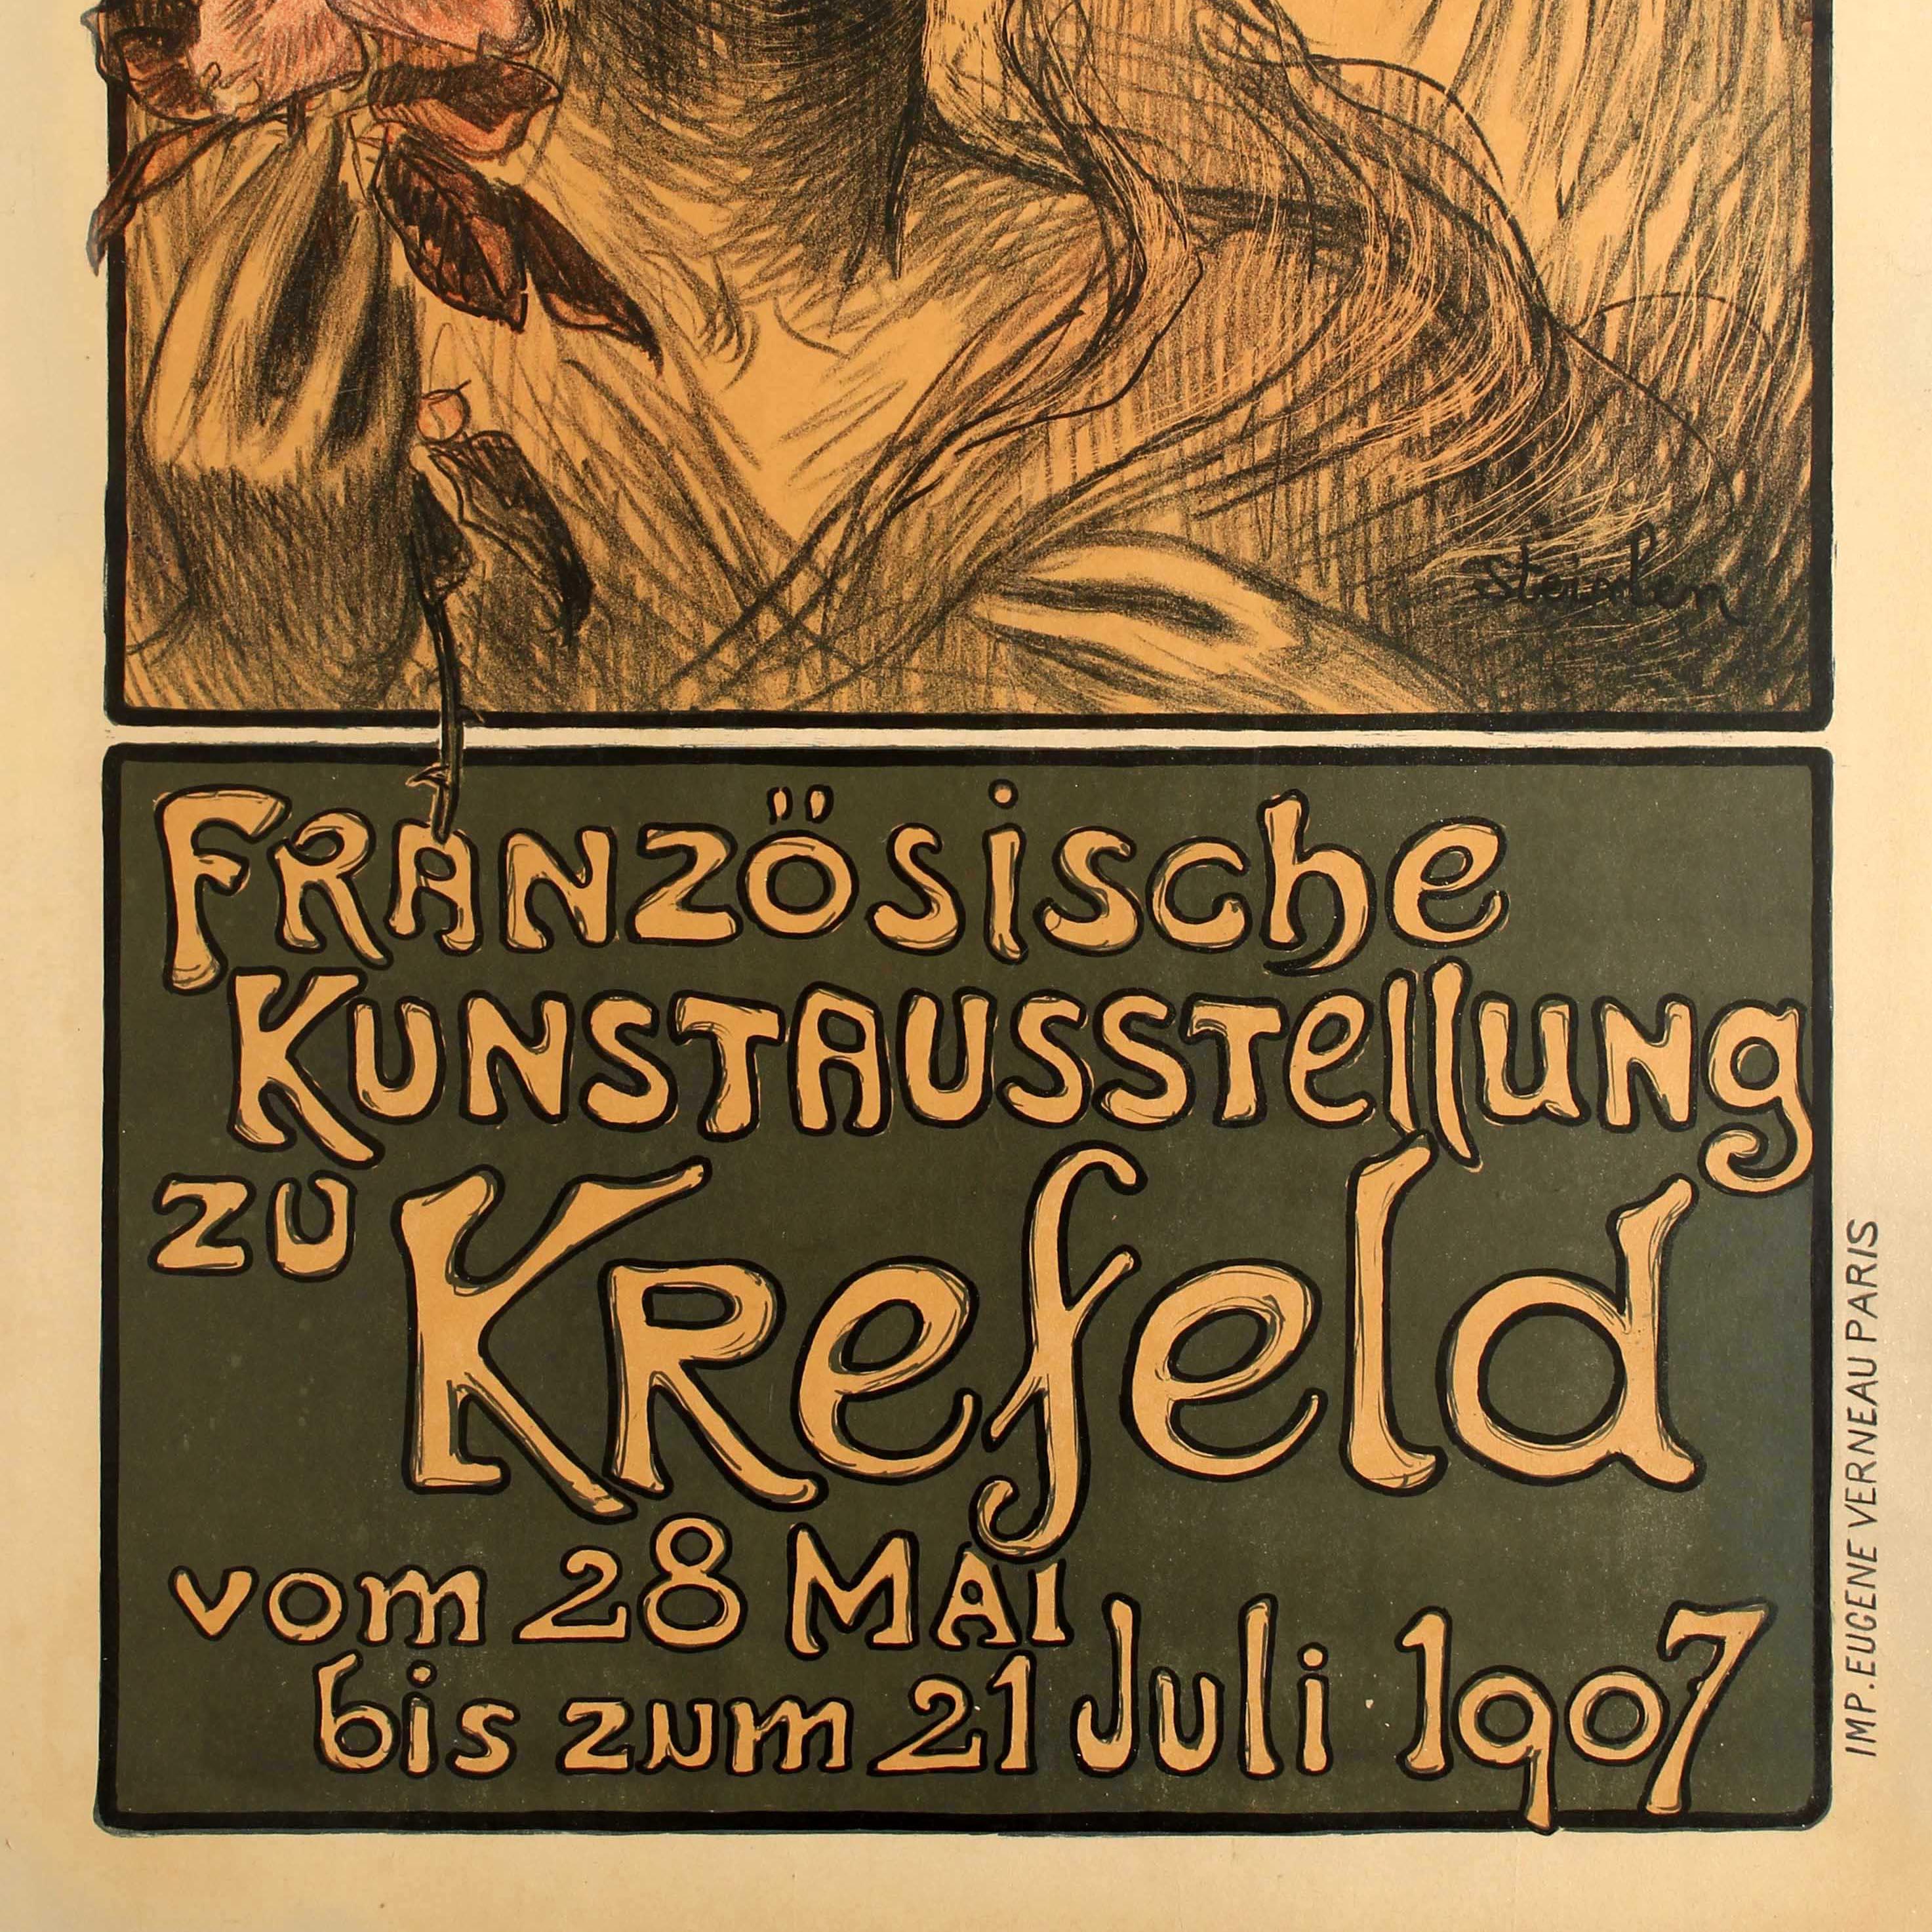 Original Antique Art Nouveau Poster for a French Art Exhibition in Krefeld In Good Condition For Sale In London, GB